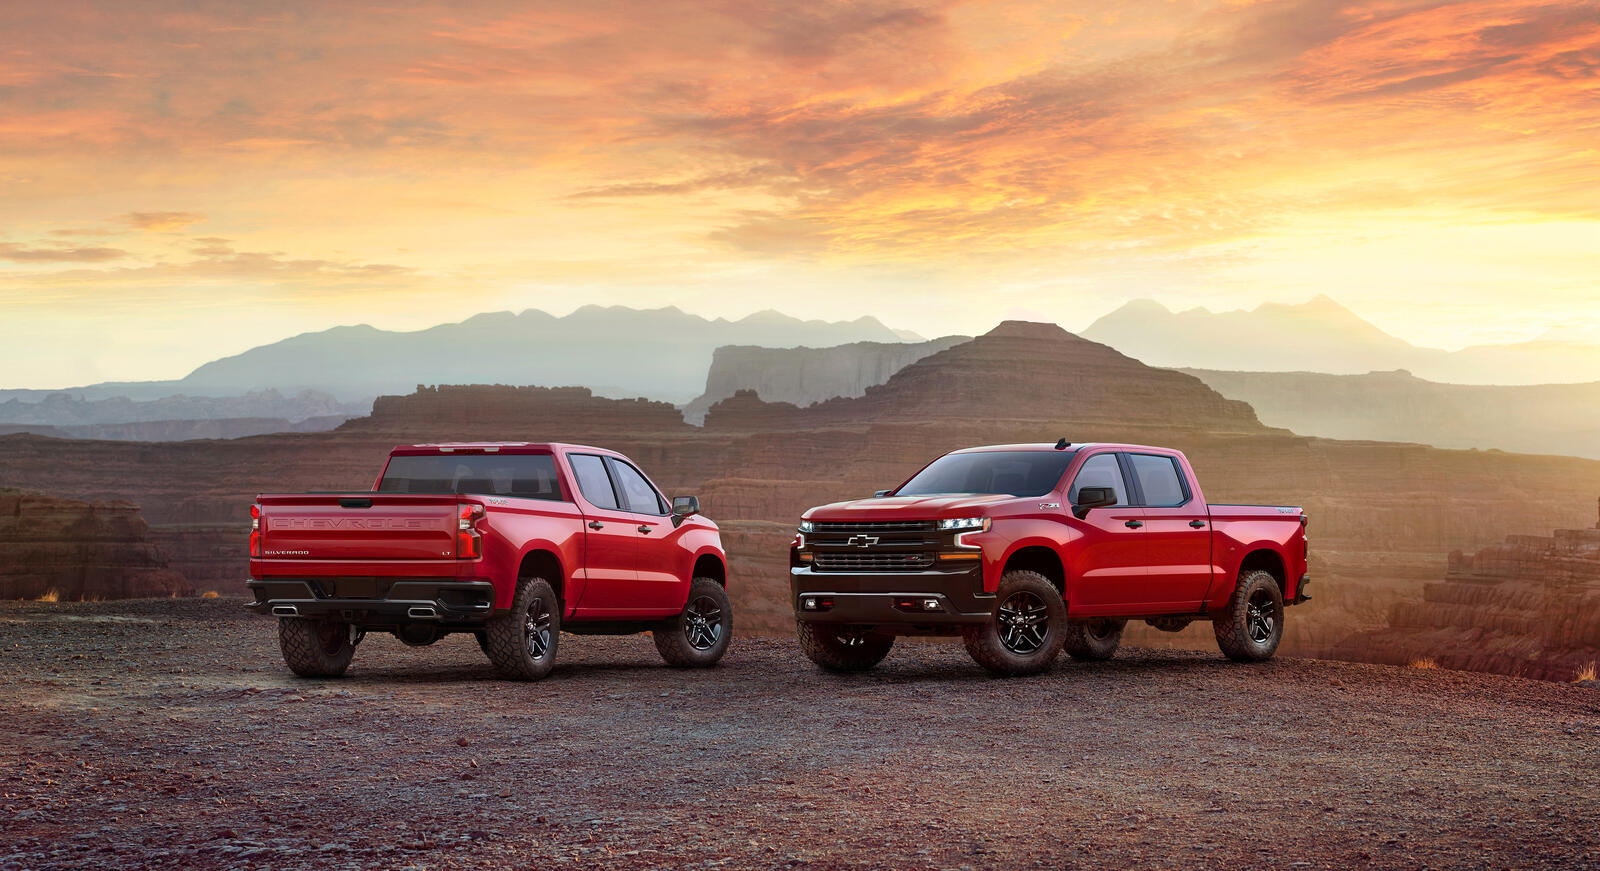 Free photo The 2019 Chevrolet Silverado in red during sunset